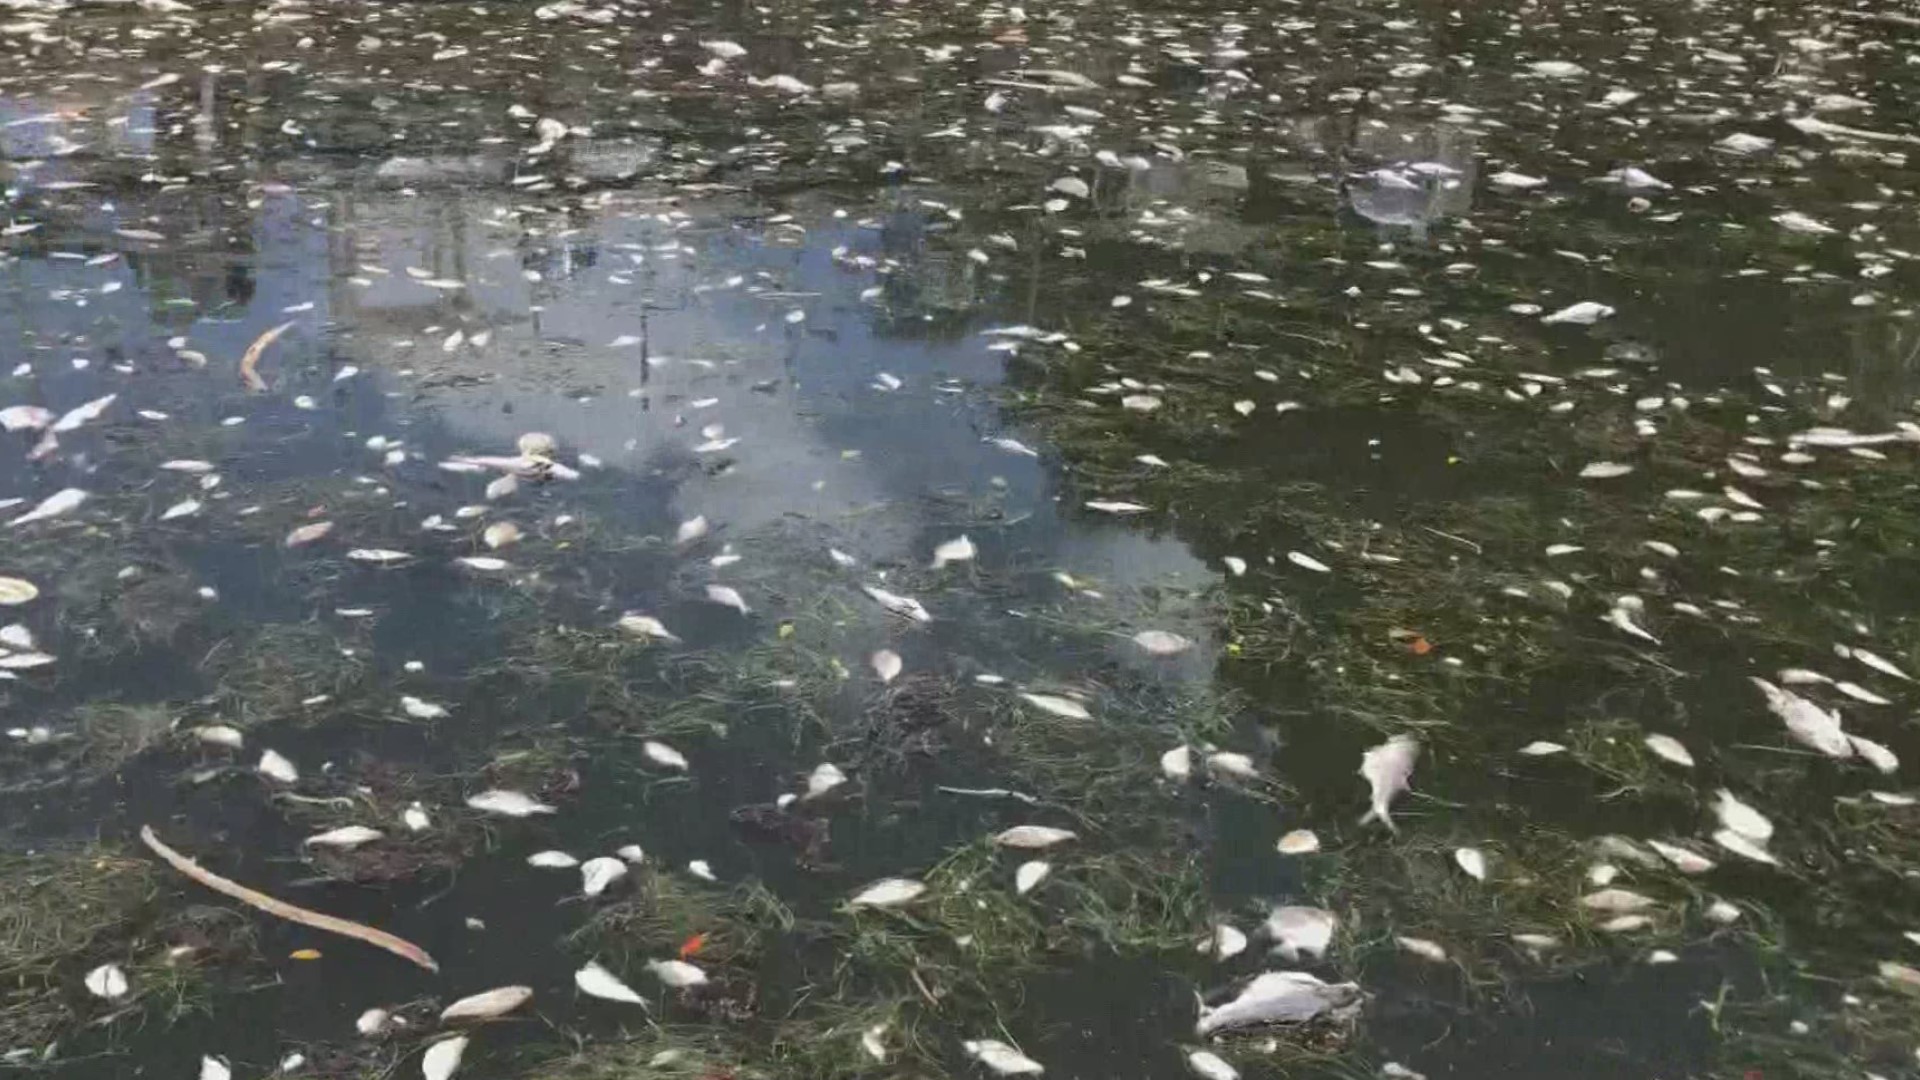 Parts of St. Petersburg are seeing some of the highest concentrations of red tide. More than 110 tons of dead sea life have been picked up so far there.